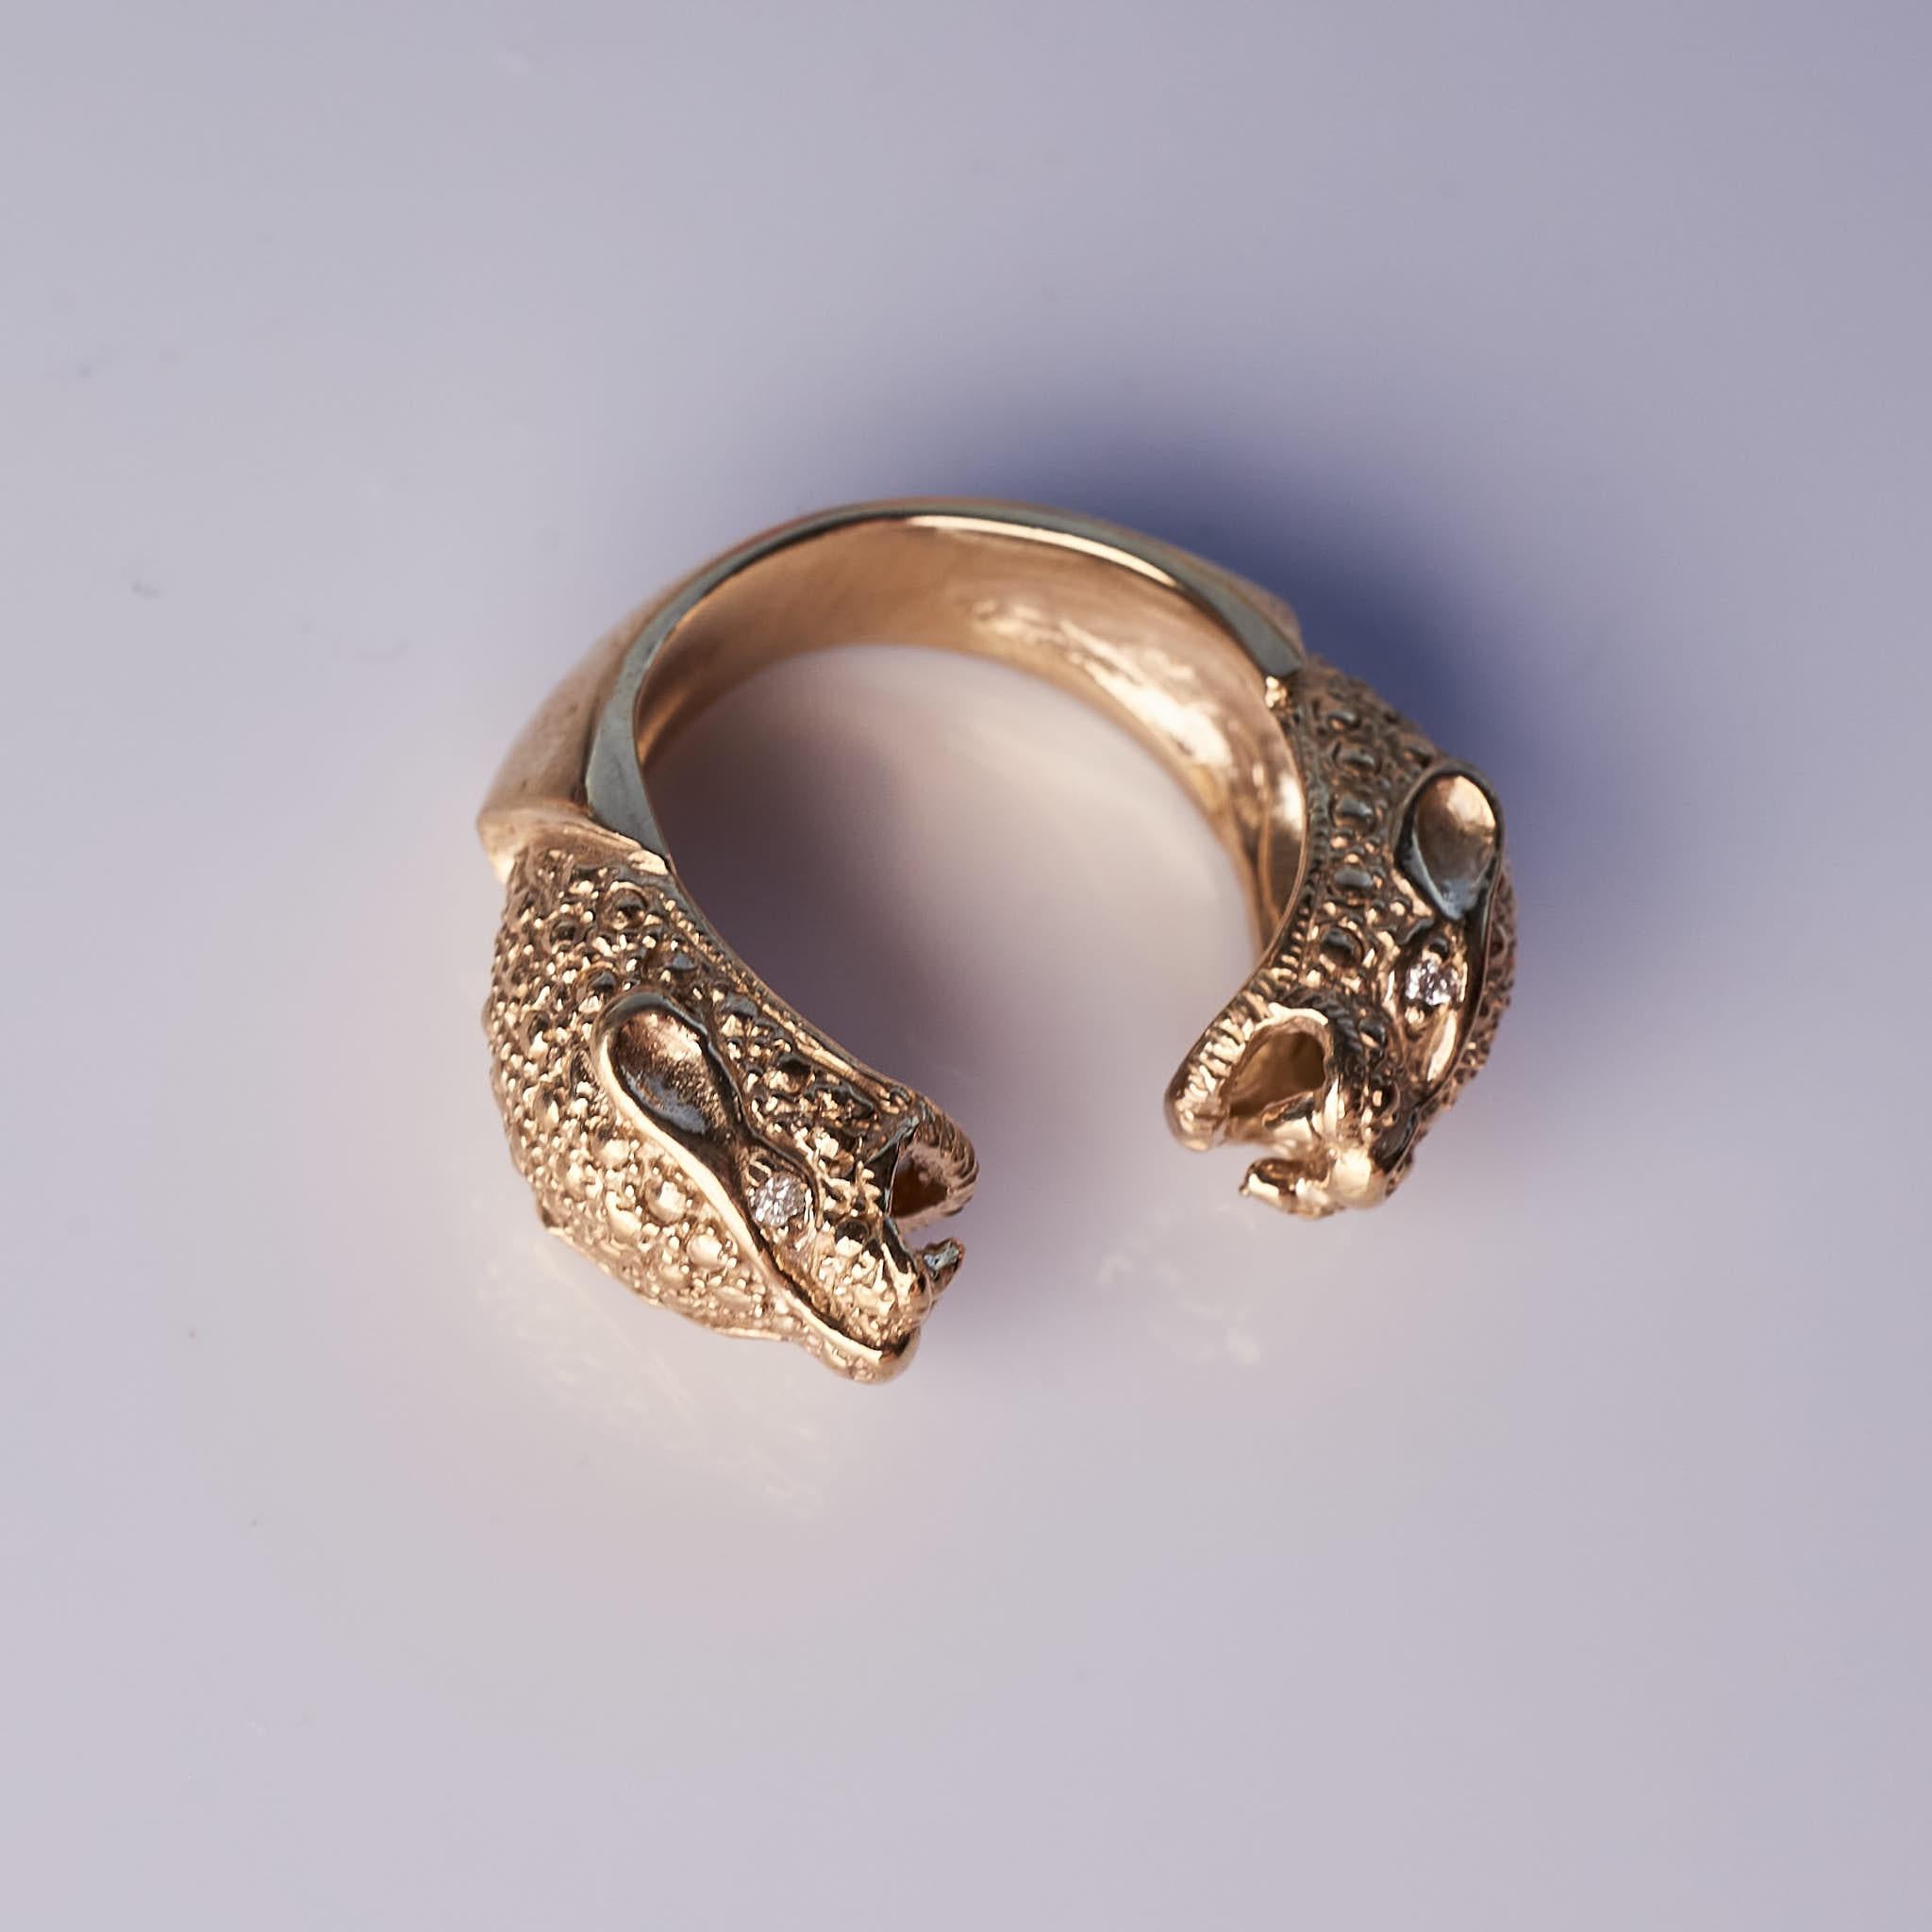 White Diamond Double Head Jaguar Ring Gold Animal Cocktail Ring J Dauphin For Sale 1